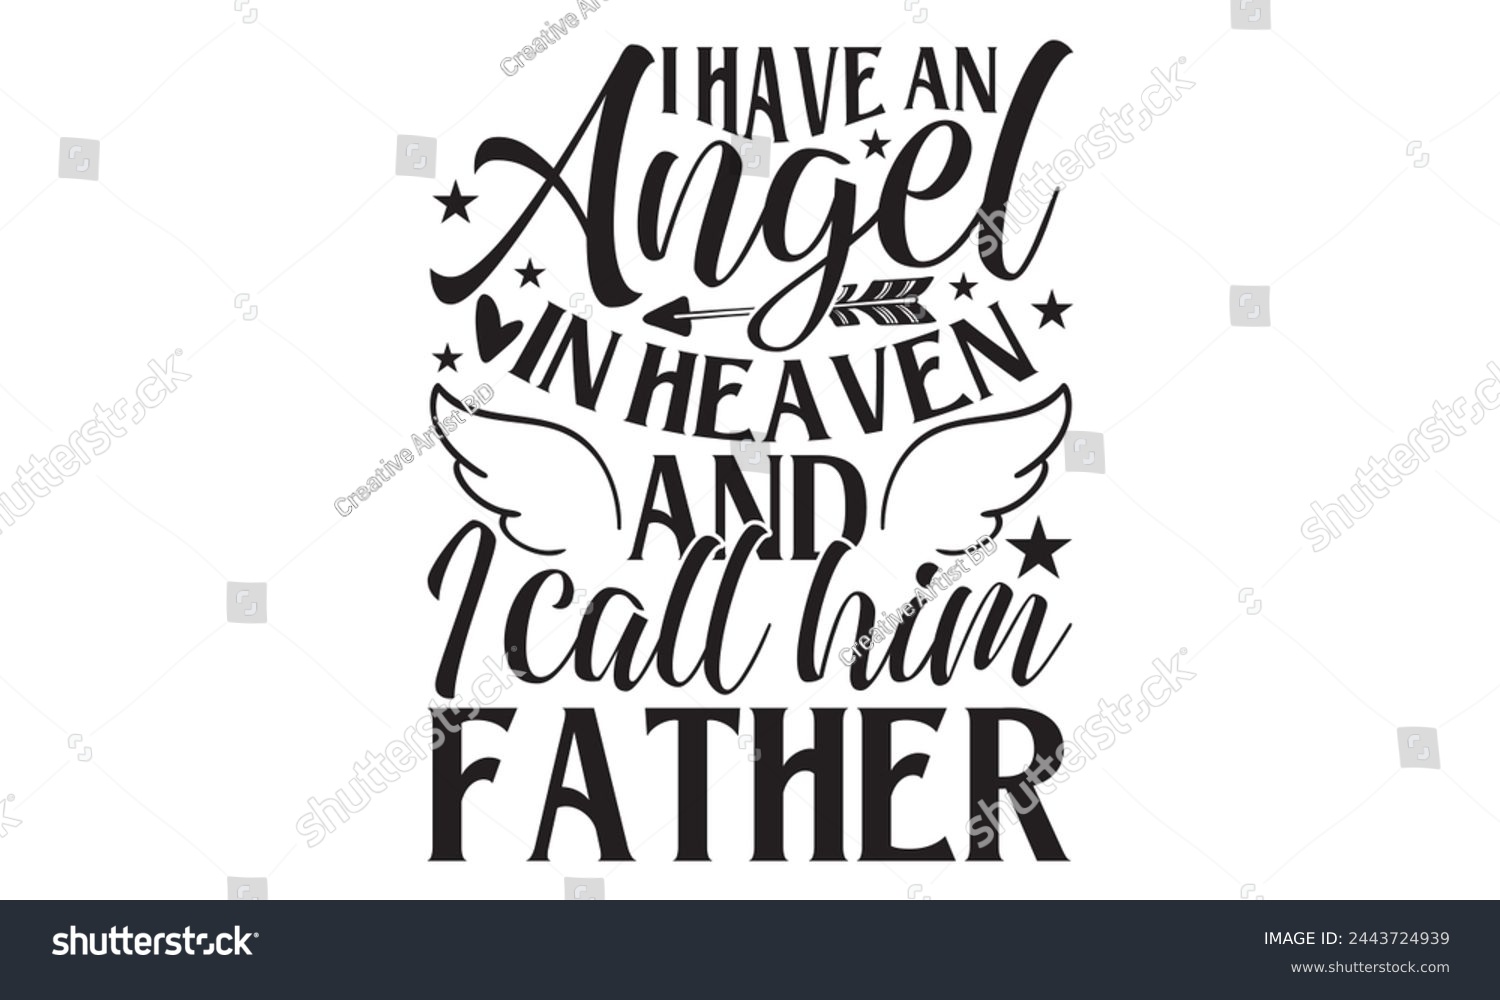 SVG of I Have An Angel In Heaven And I Call Him Father  - Memorial T shirt Design, Handmade calligraphy vector illustration, Cutting and Silhouette, for prints on bags, cups, card, posters. svg